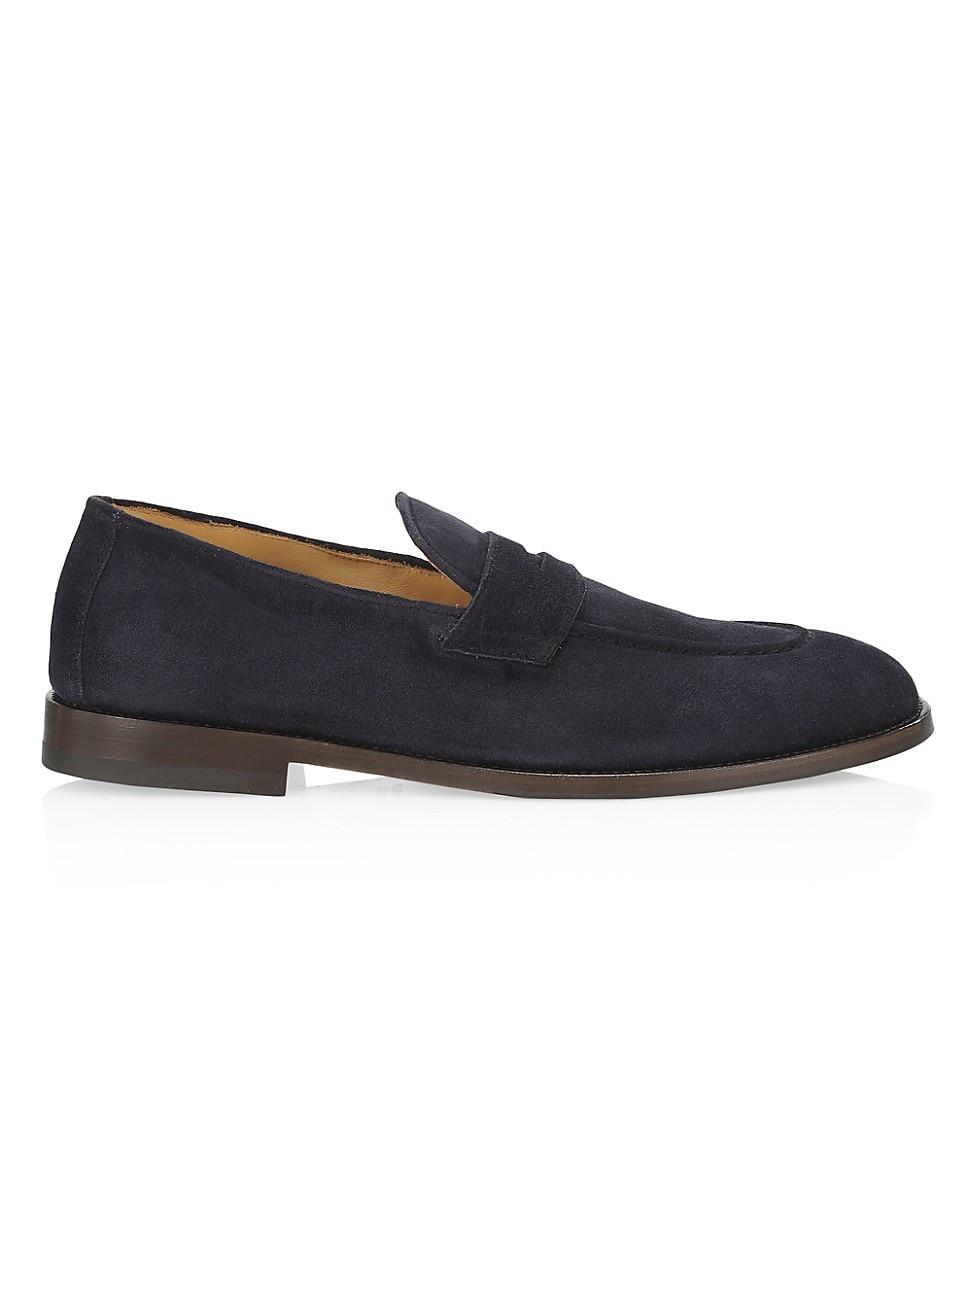 Mens Suede Penny Loafers Product Image